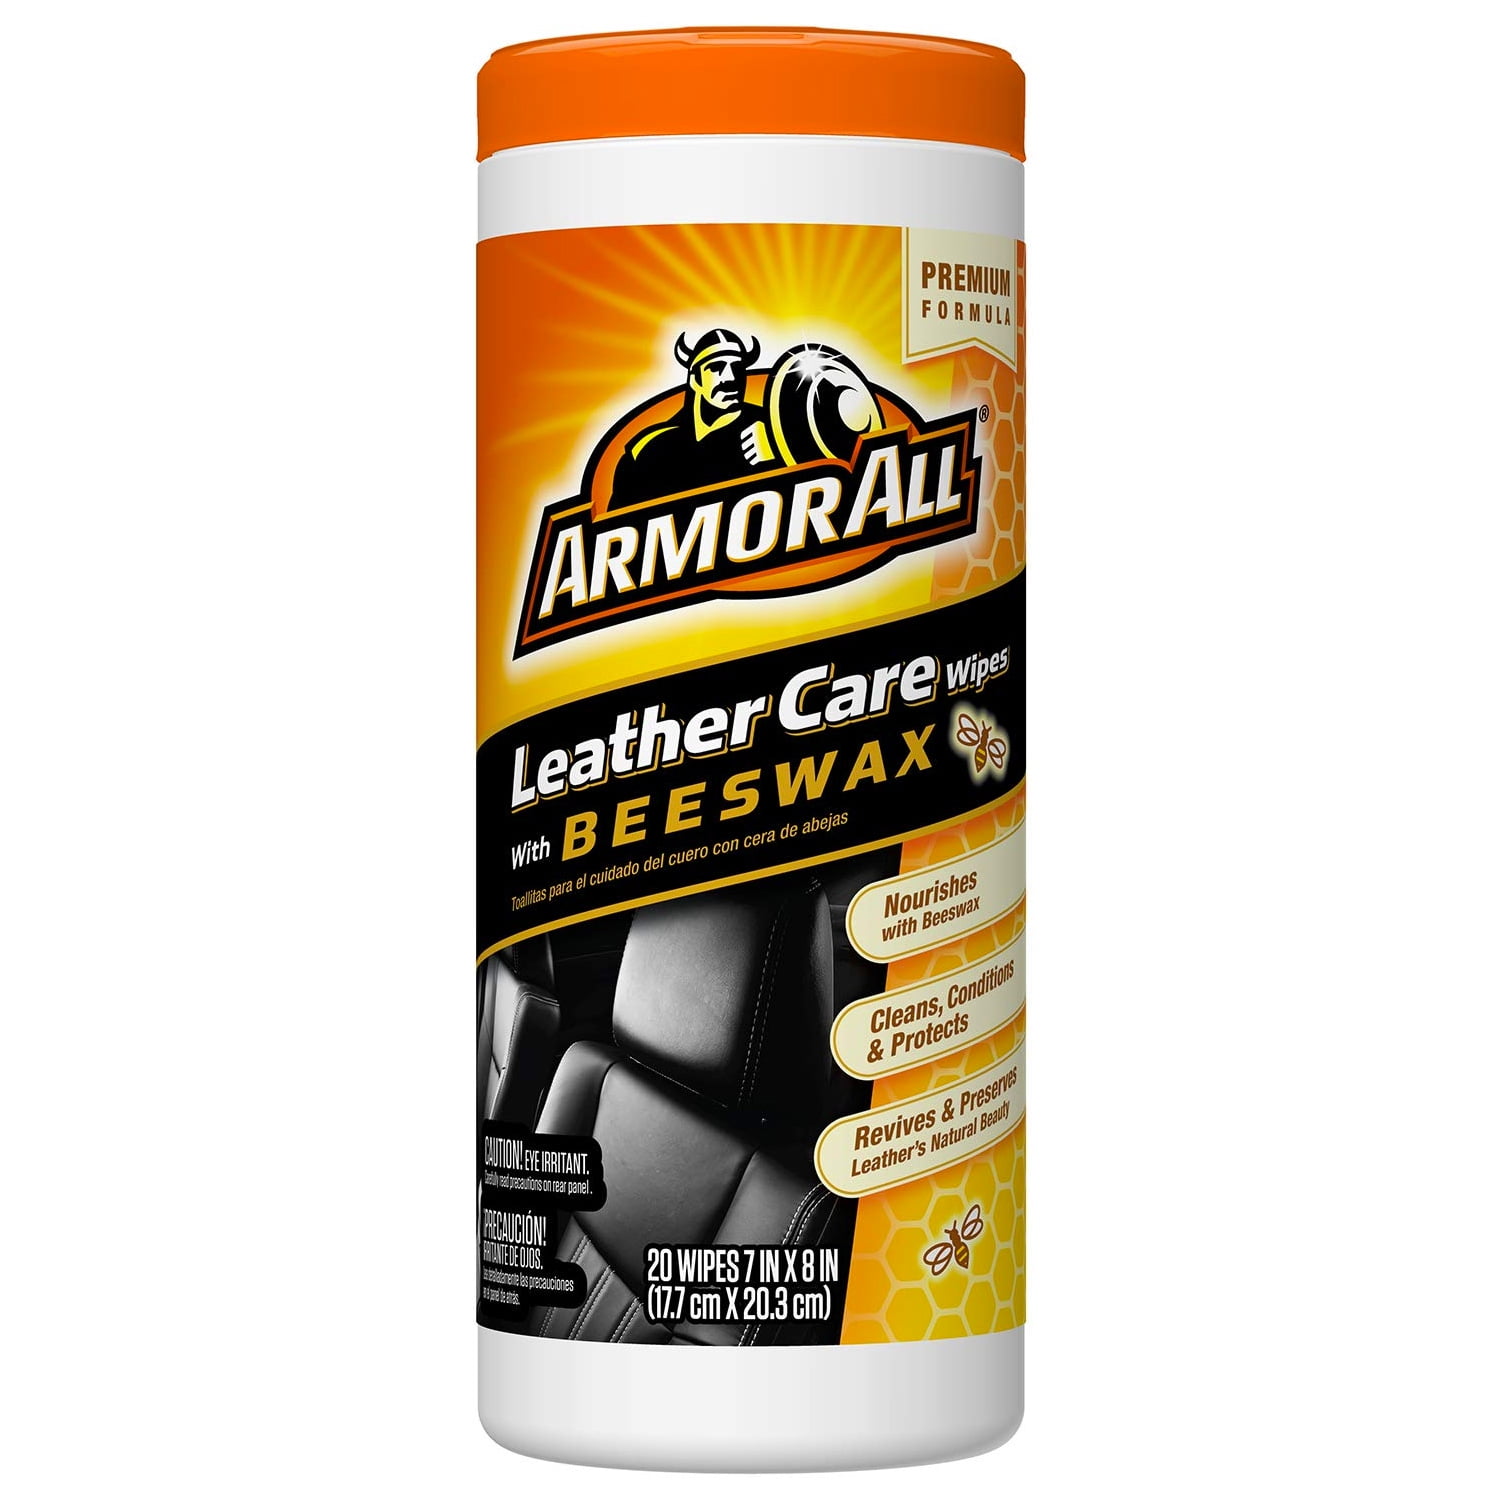 Armor All Leather Wipes 20 ea Pack of 6 